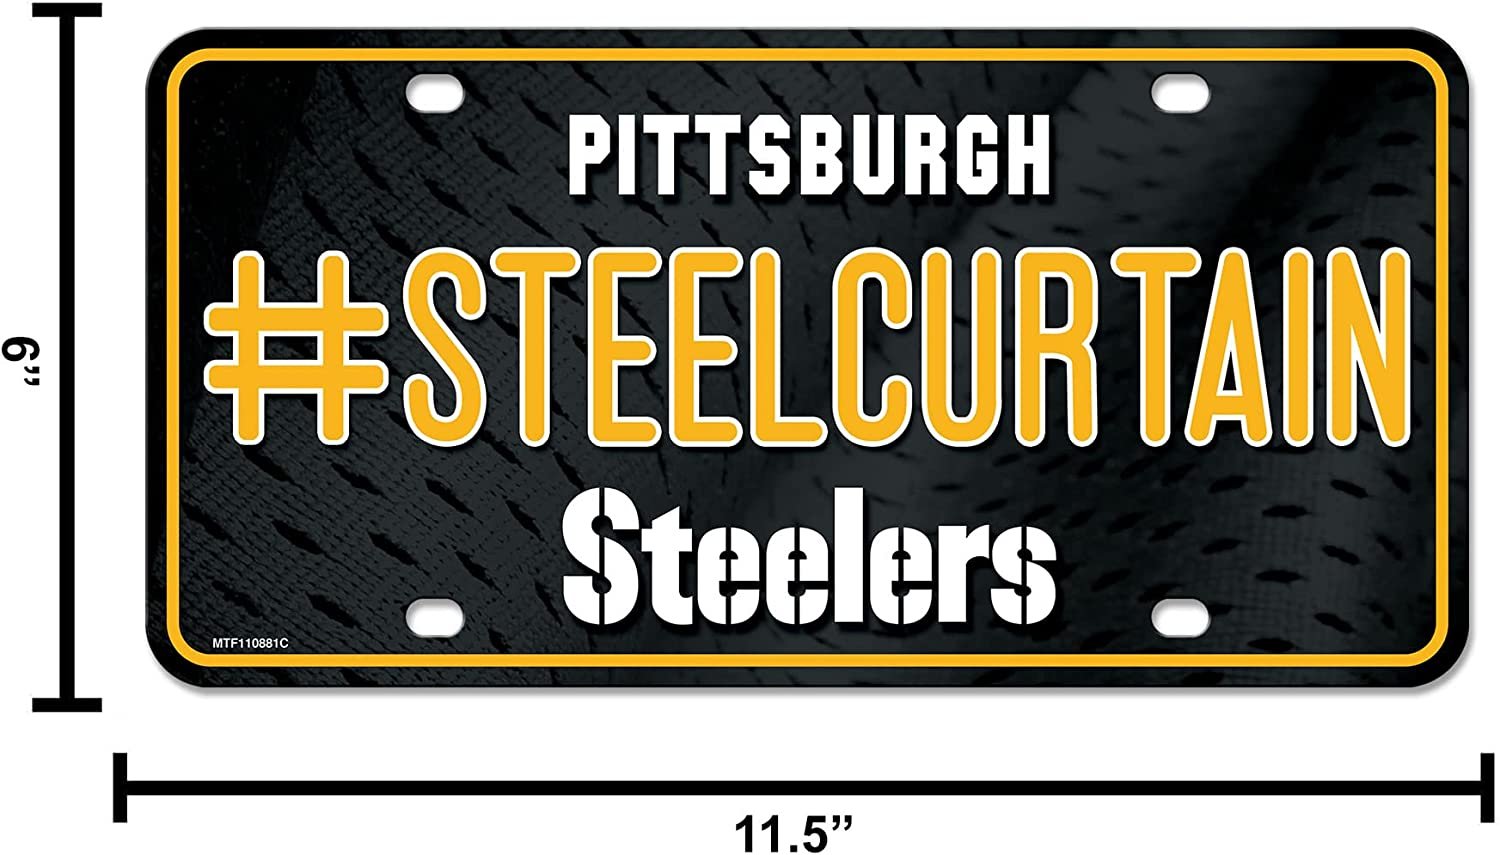 Pittsburgh Steelers Metal Auto Tag License Plate, Steel Curtain Design, 12x6 Inch